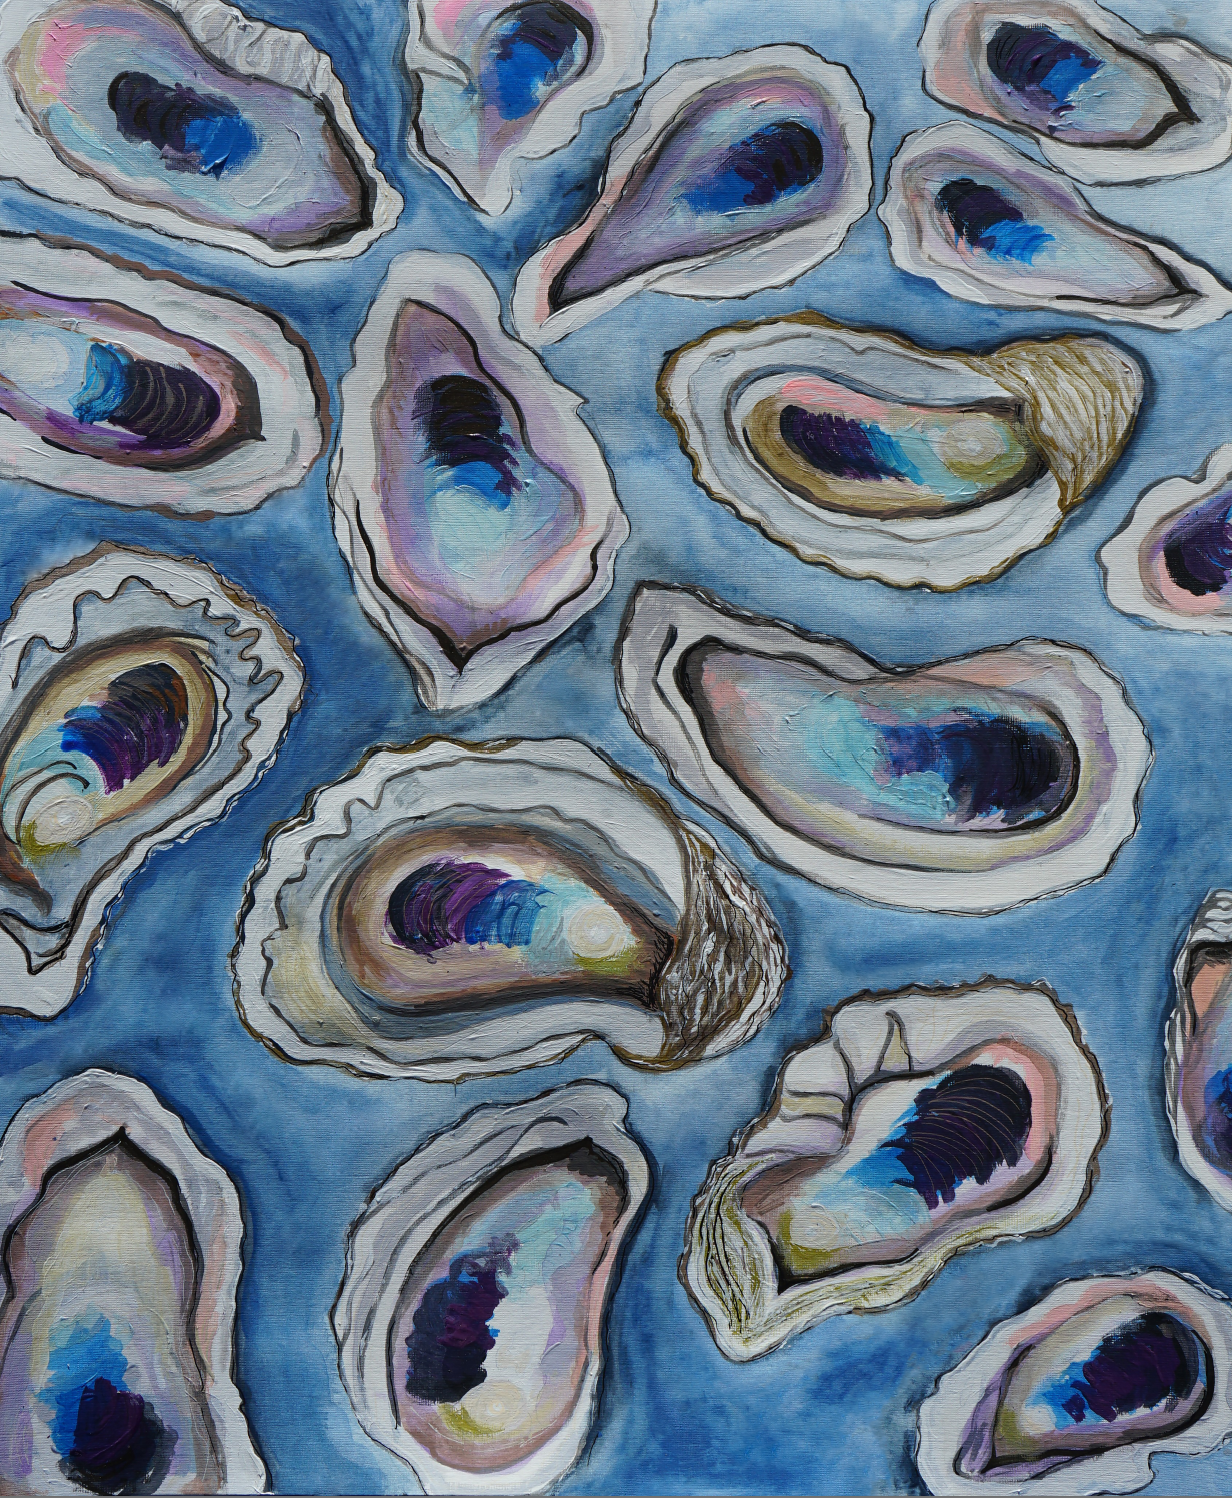 Blue Oysters-Framed Print with Mat